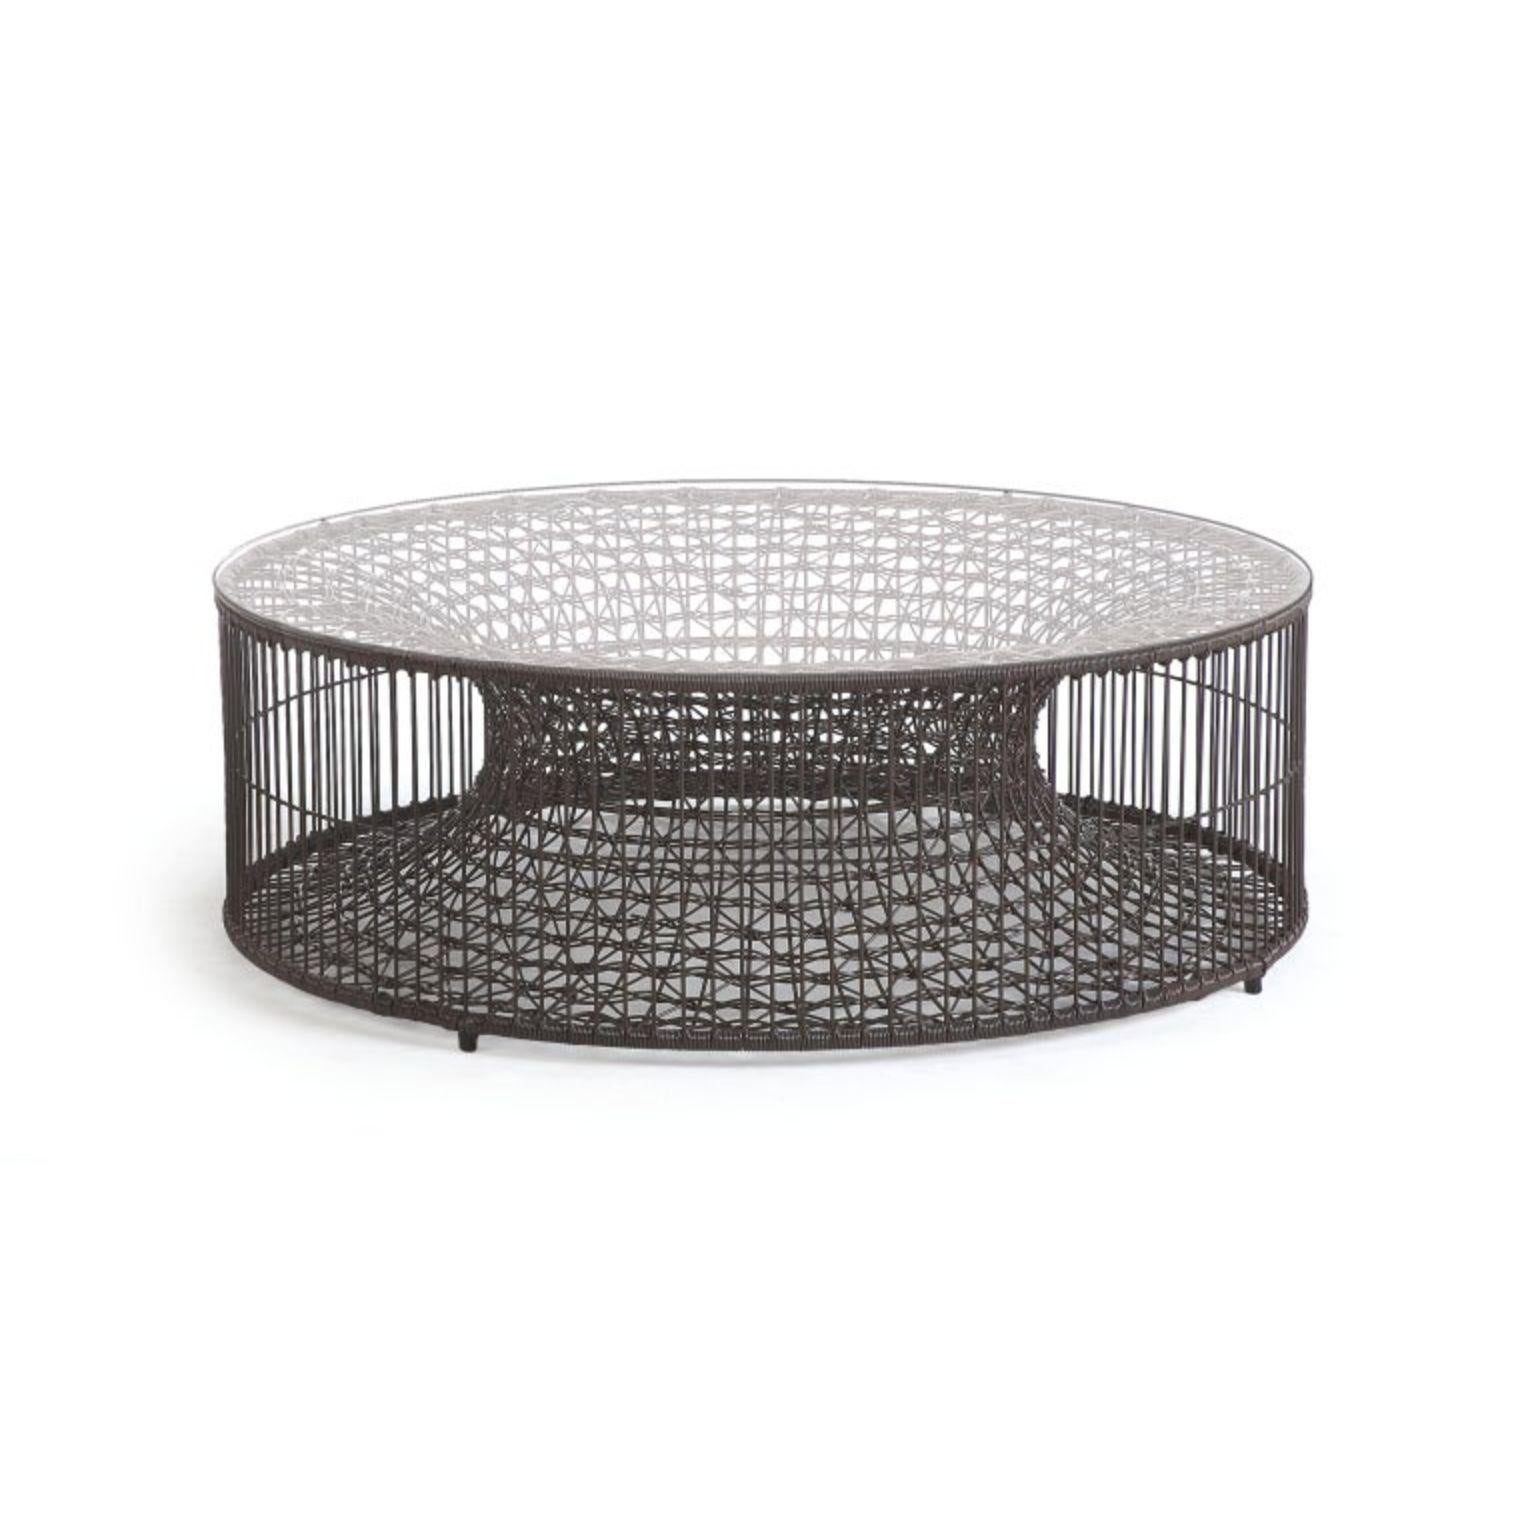 Amaya coffee table, Kenneth Cobonpue.
Materials: Abaca, steel.
Dimensions: D 102 x W 102 x H 34 cm.

Also available for outdoor.

Kenneth Cobonpue is a multi-awarded furniture designer and manufacturer from Cebu, Philippines. His passage to